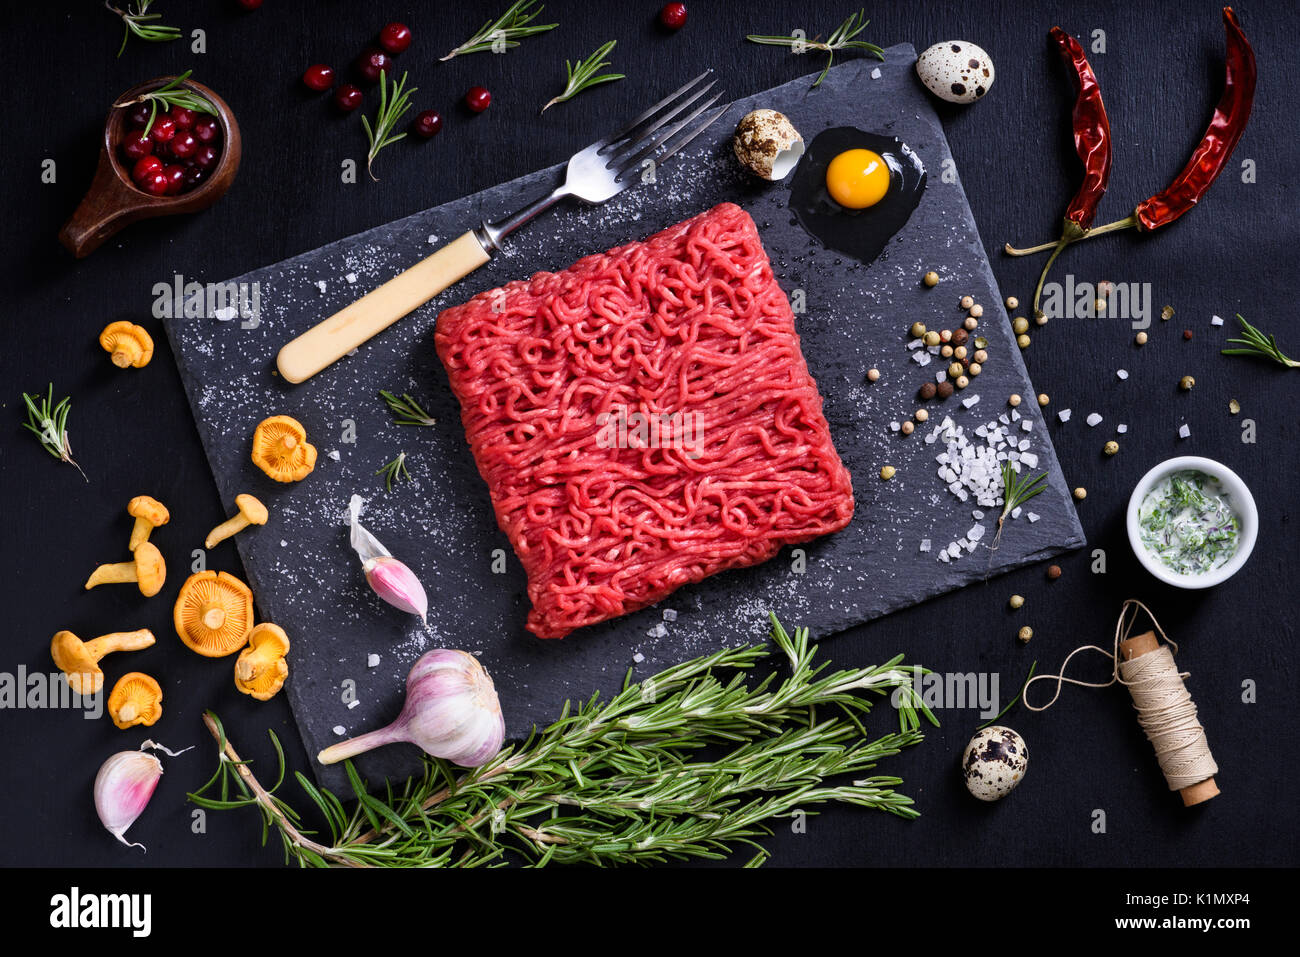 Chopped or minced meat with herbs, berries and chanterelles. Restaurant cooking concept. Top view. Stock Photo